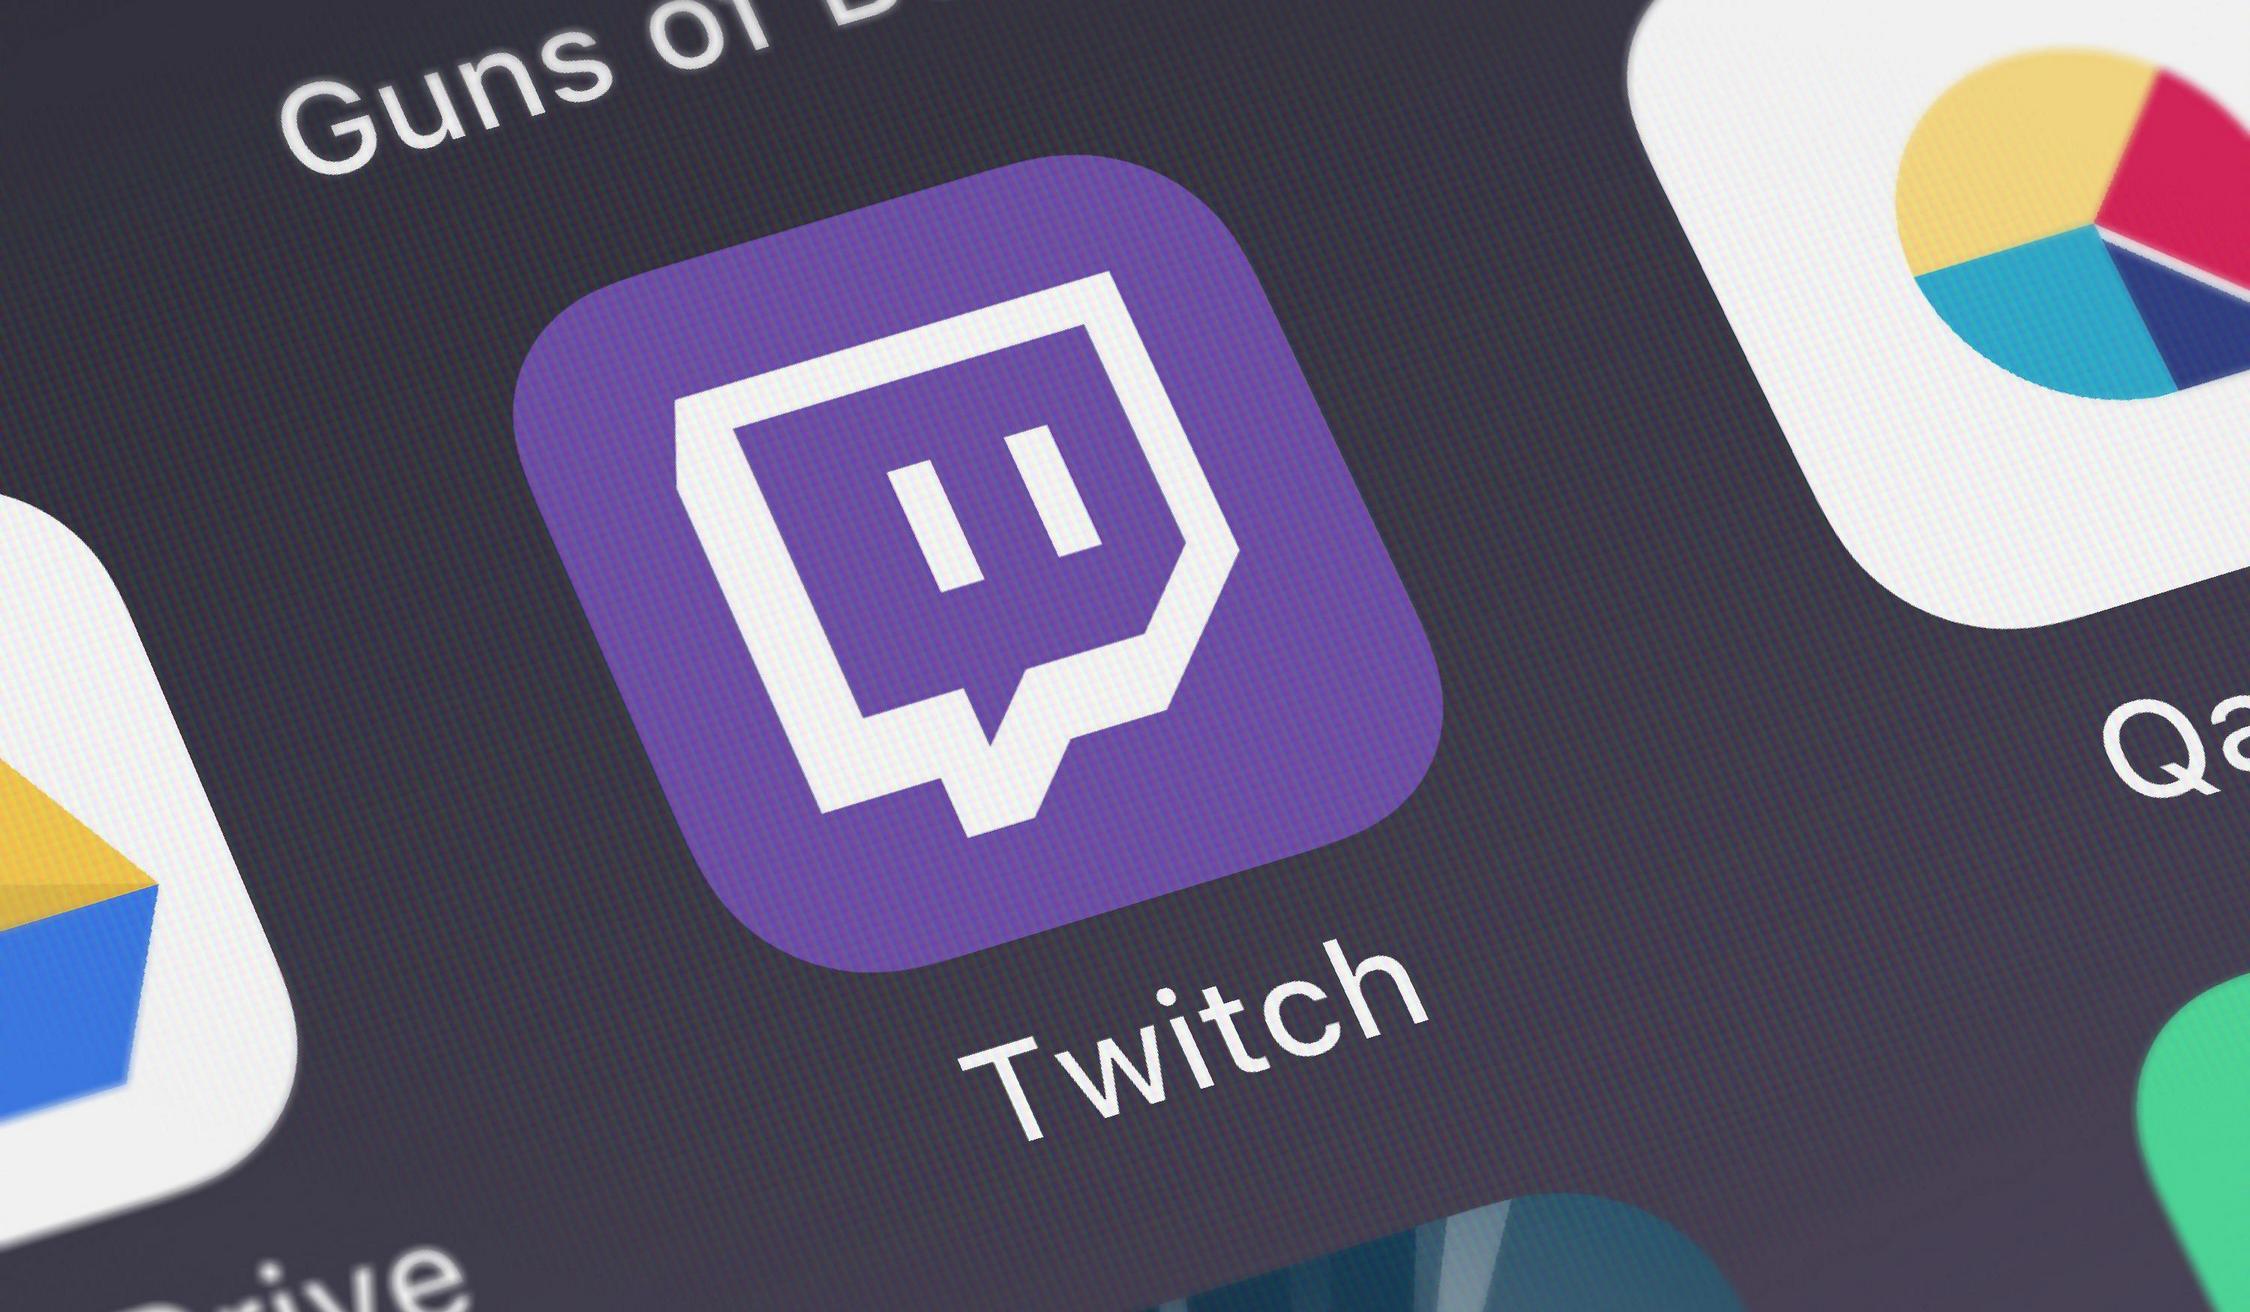 how to become a successful streamer,twitch,streaming websites,start a twitch channel